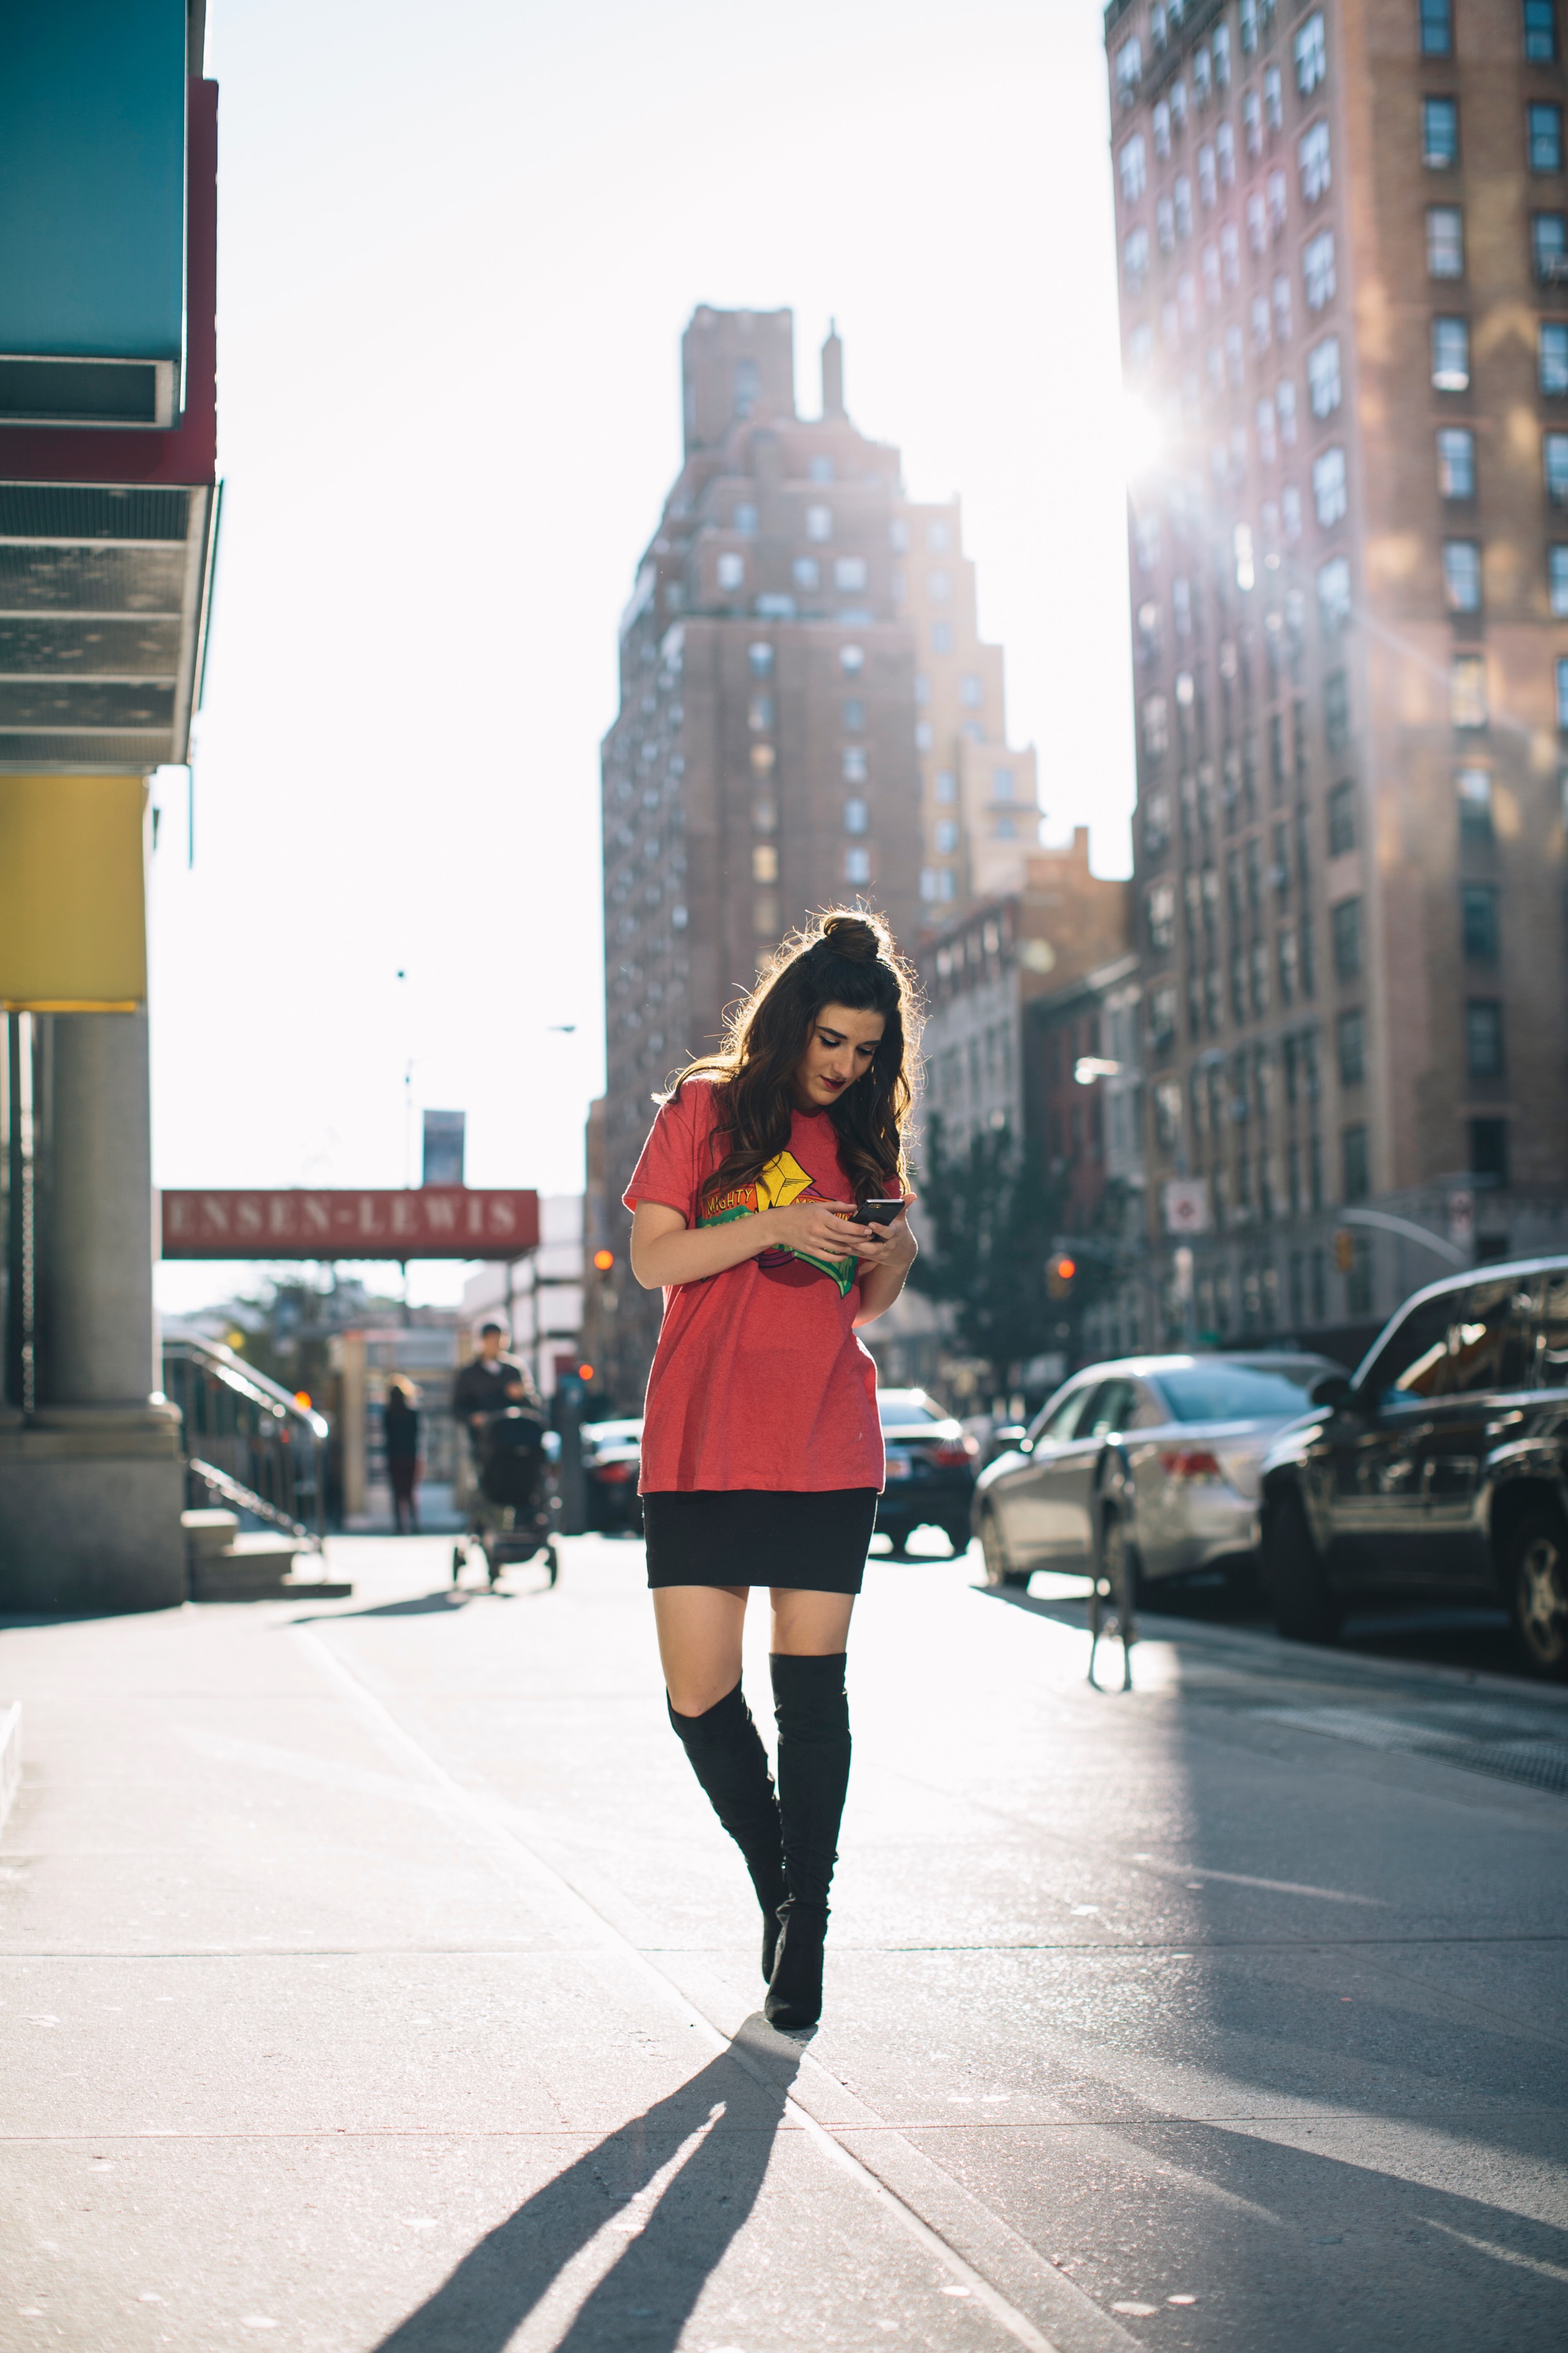 Power Rangers Tee + OTN Boots Hashtag Blogger Problems Louboutins & Love Fashion Blog Esther Santer NYC Street Style Blogger Outfit OOTD Trendy Red Top Black Mini Skirt Women Girl What To Wear Shopping Phone Hair Bun Topknot  Fun Edgy Graphic T-Shirt.jpg